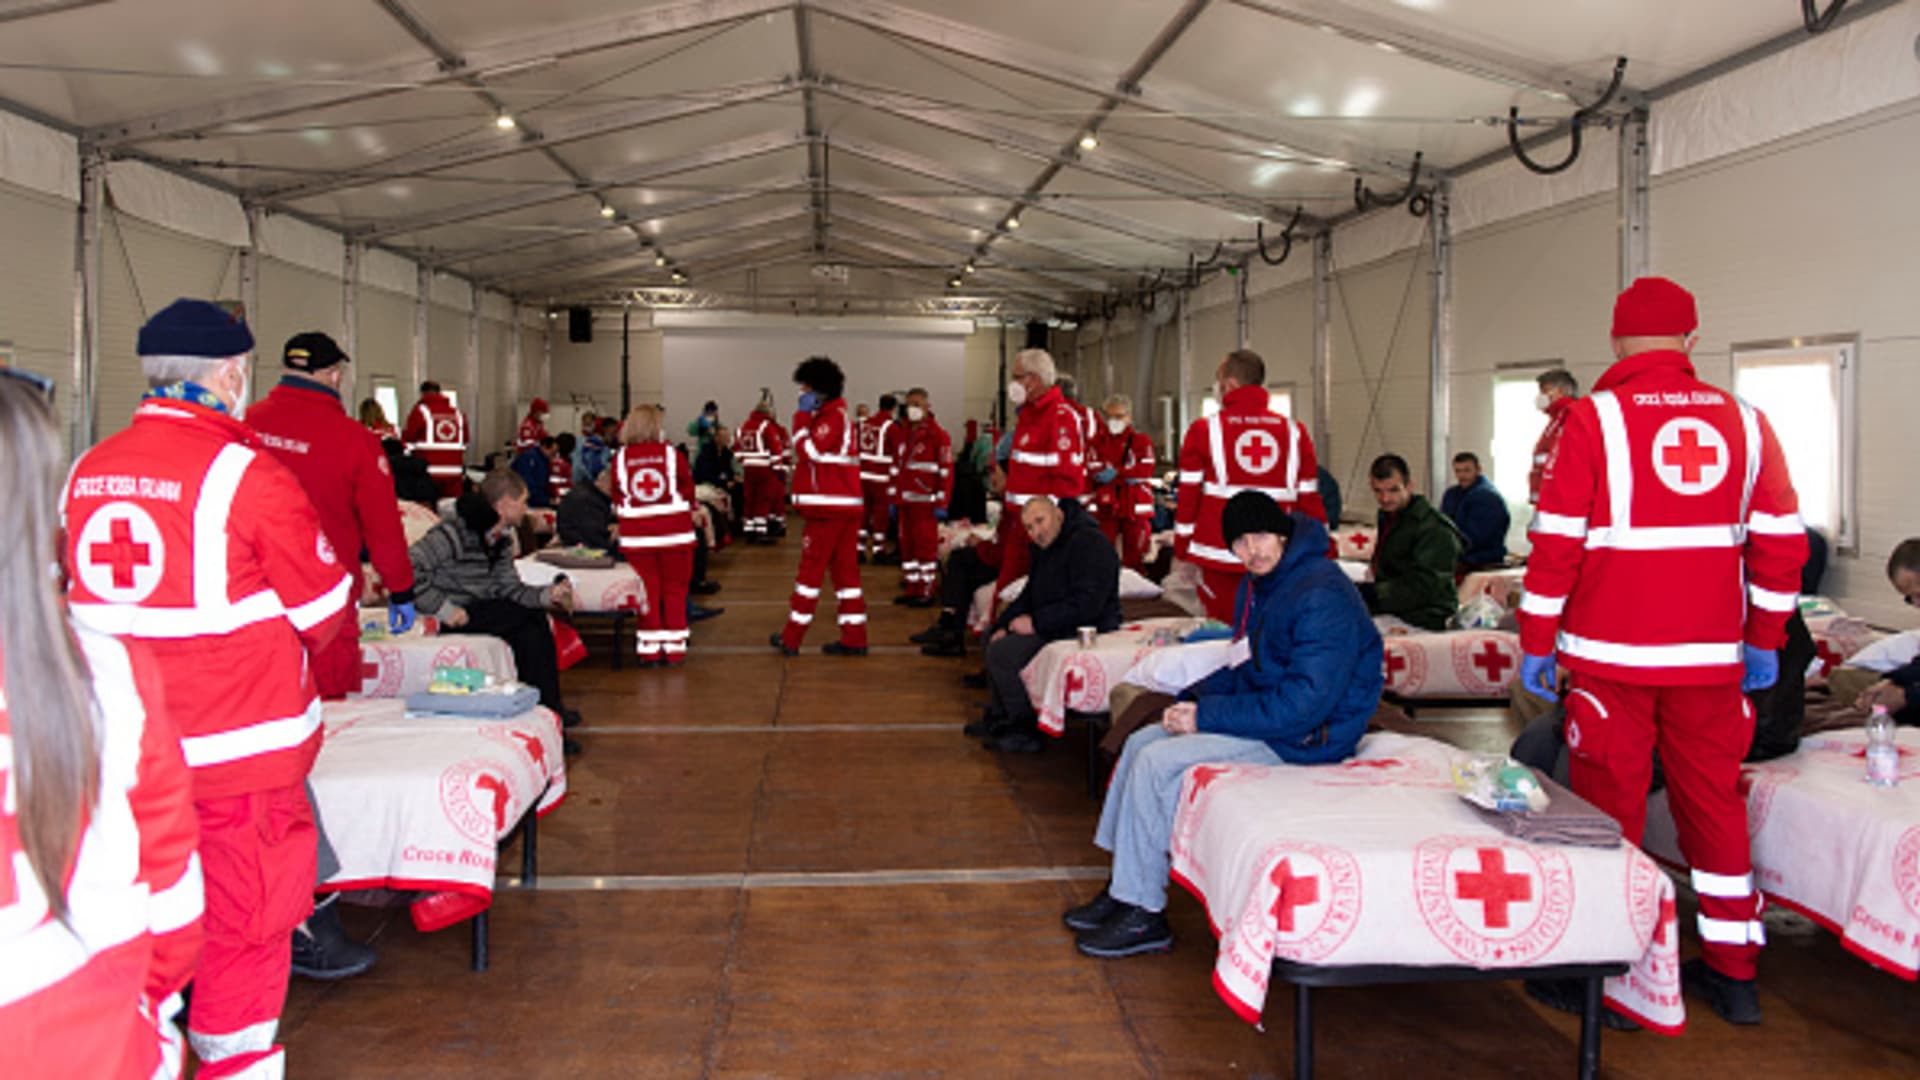 General view of Ukrainian refugees looked after by Red Cross volunteers inside the Red Cross Headquarters on April 7, 2022 in Settimo Torinese near Turin, Italy. 